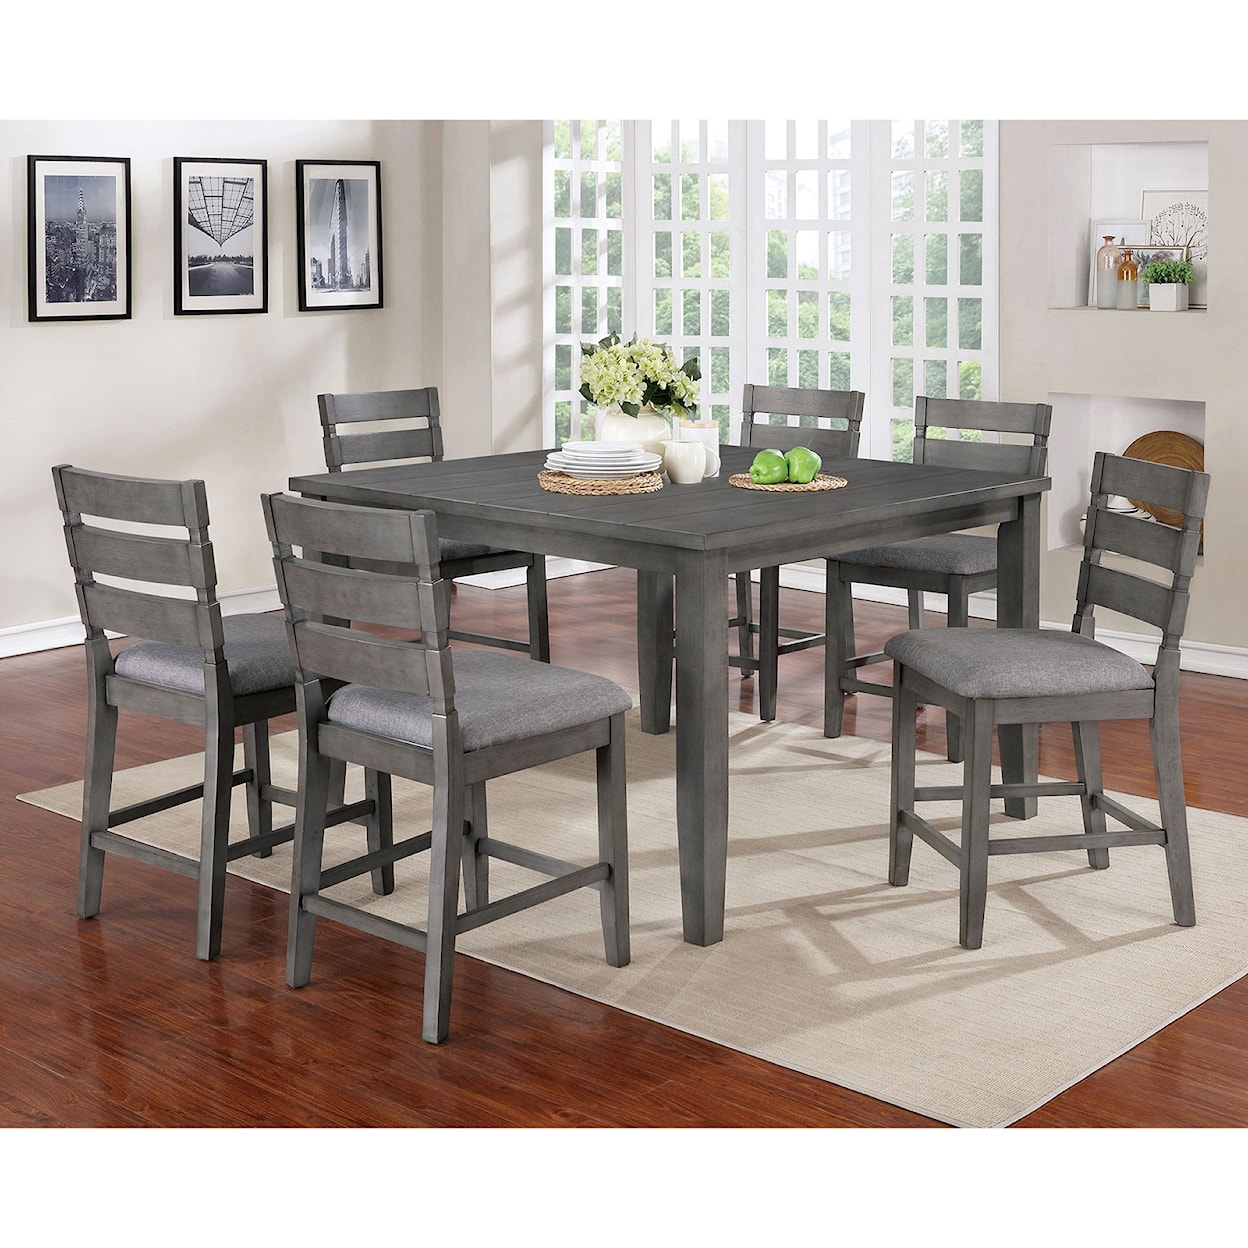 Furniture of America Viana 7-Piece Counter Height Dining Set